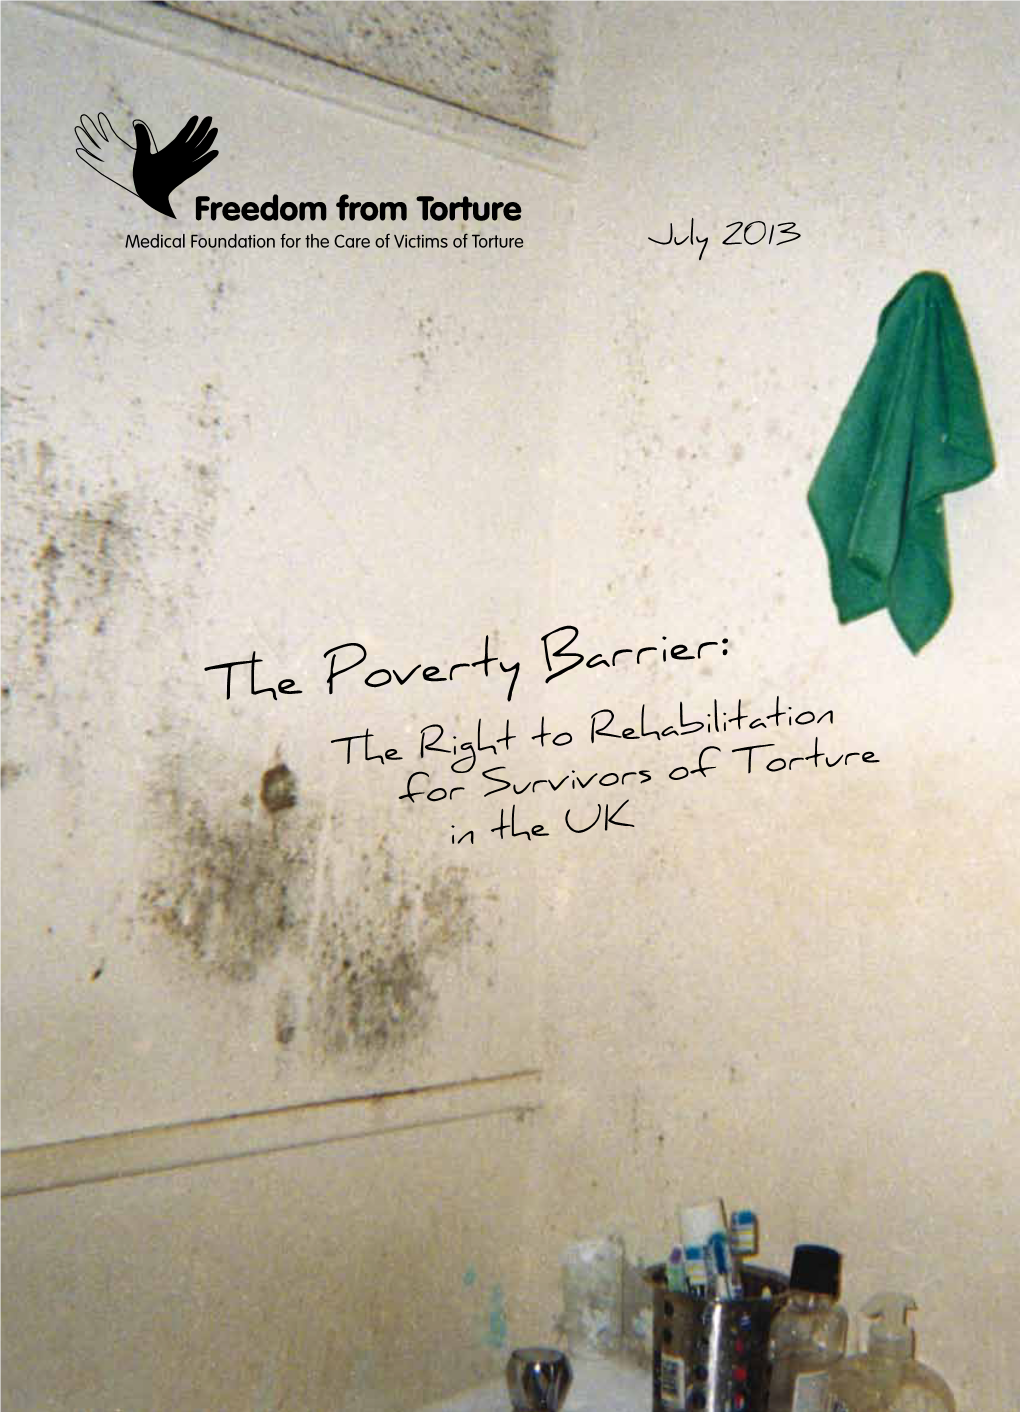 The Poverty Barrier: the Right to Rehabilitation for Survivors of Torture in the UK